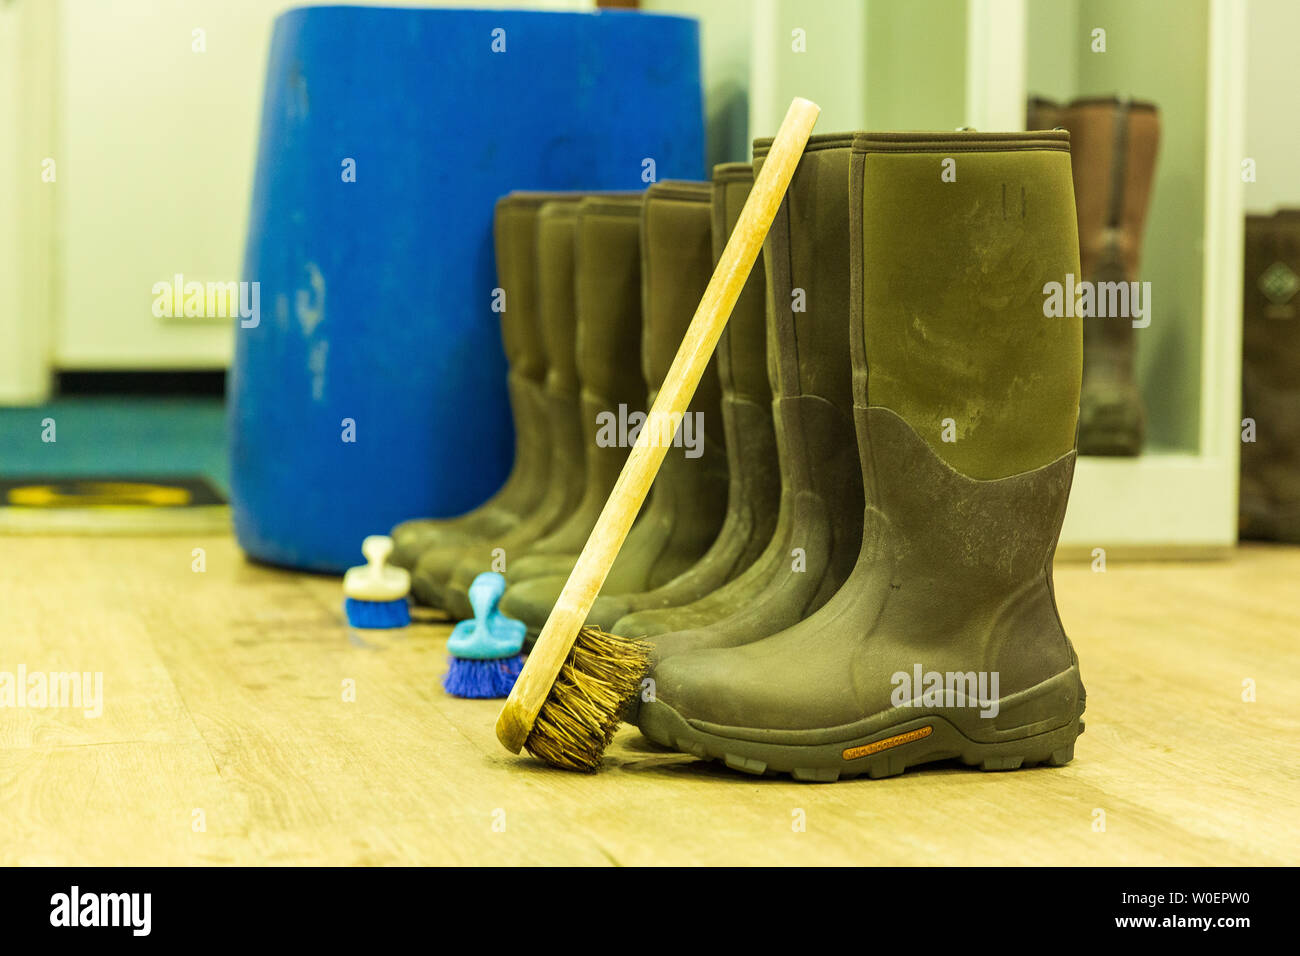 Boot cleaning on Quark Antarctic expedition complies with IAATO biosecurity guidelines to prevent transfer of alien species to Antarctic ecosystems Stock Photo